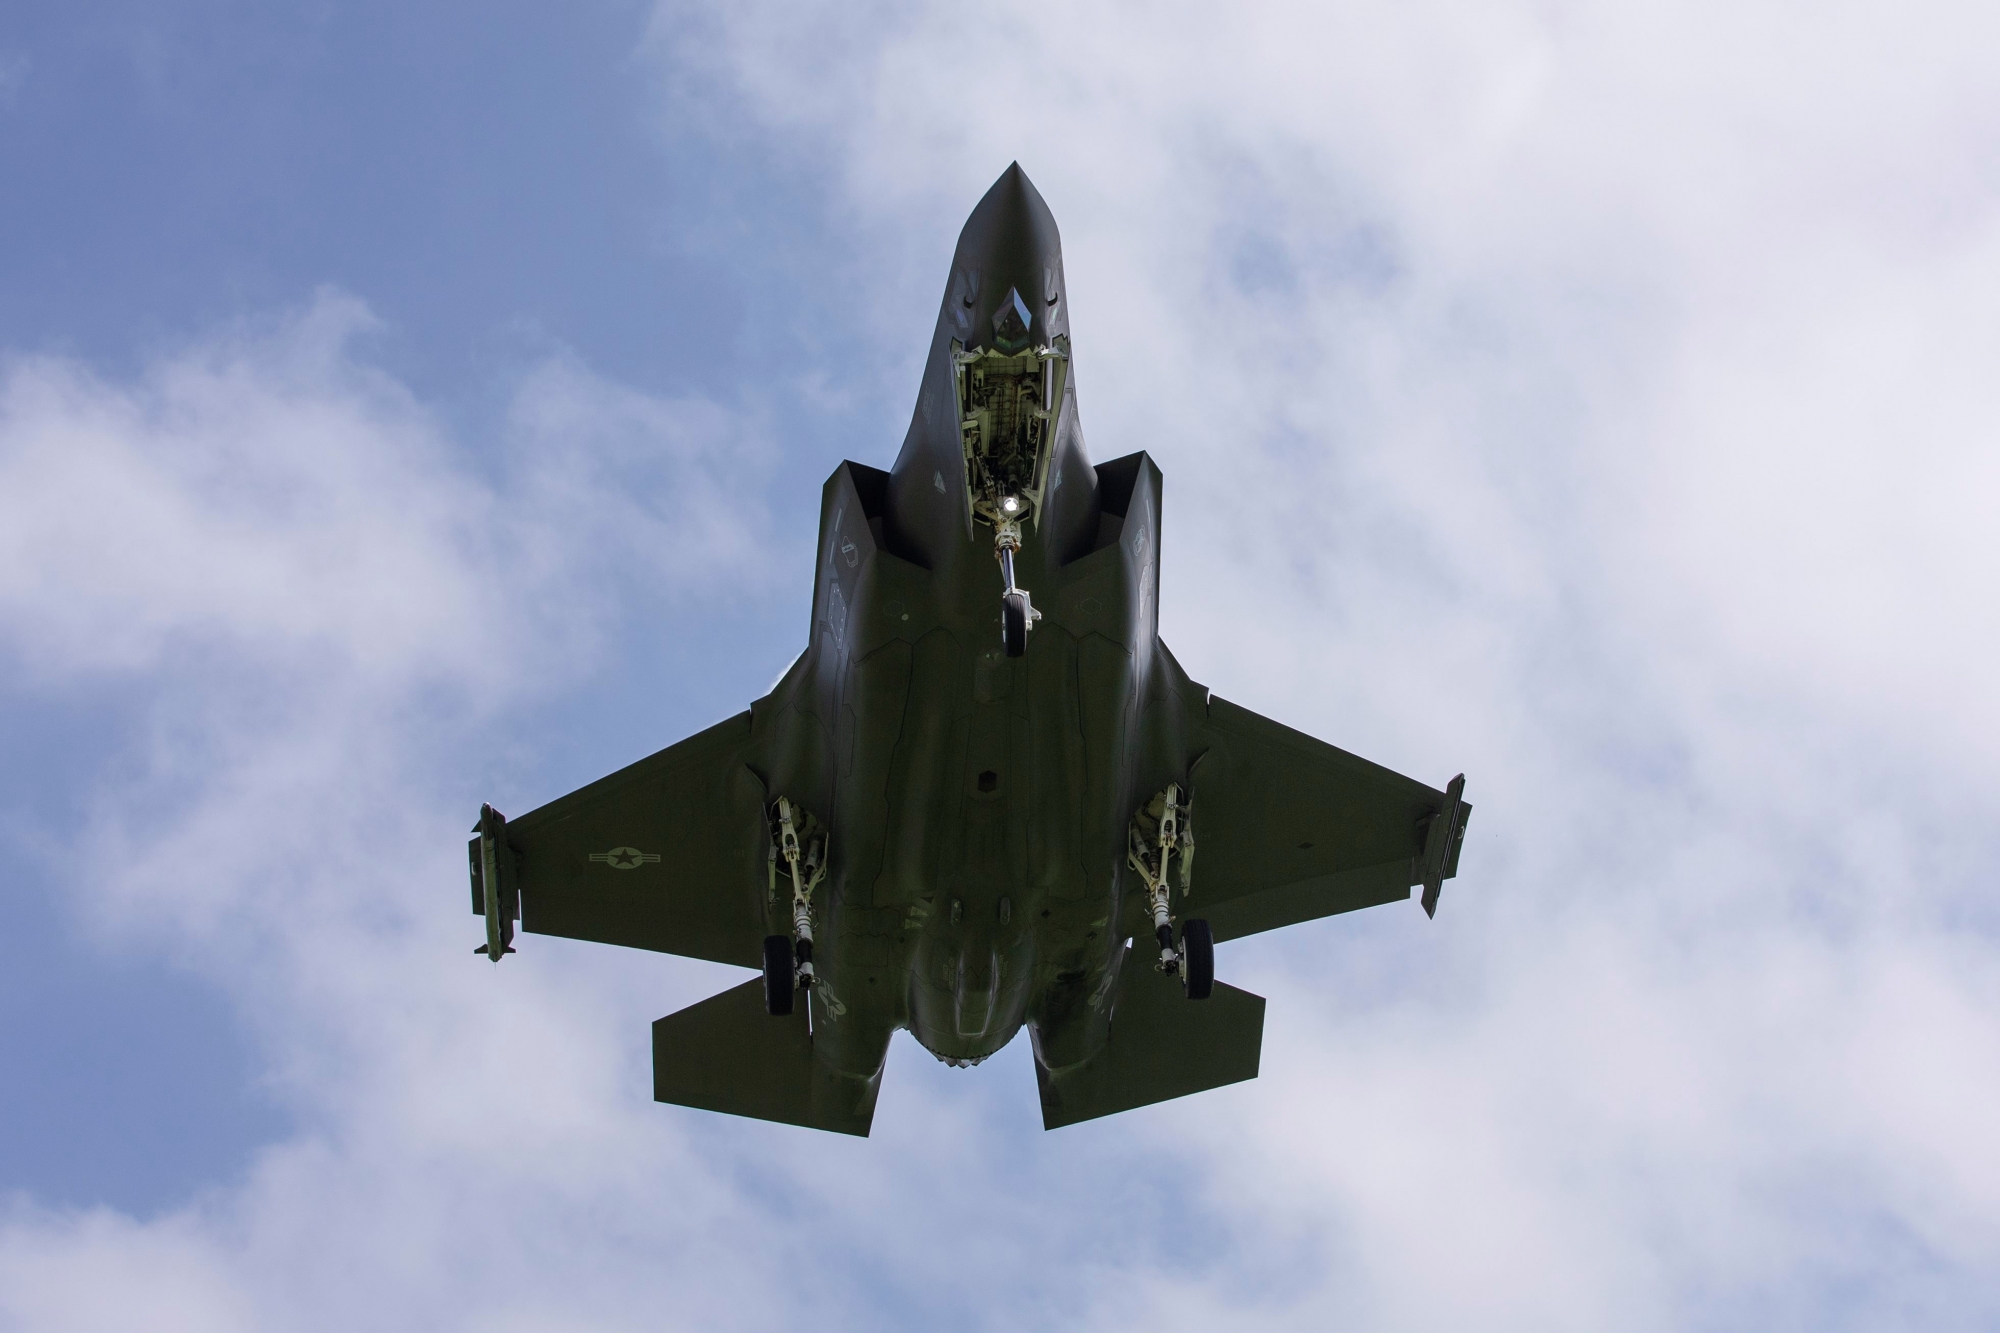 A Lockheed Martin F-35A fighter jet is pictured during a test and evaluation day at the Swiss Army airbase, in Payerne, Switzerland, Friday, June 7, 2019. (KEYSTONE/Peter Klaunzer) SCHWEIZ MILITAER LUFTWAFFE LOCKHEED MARTIN F-35A